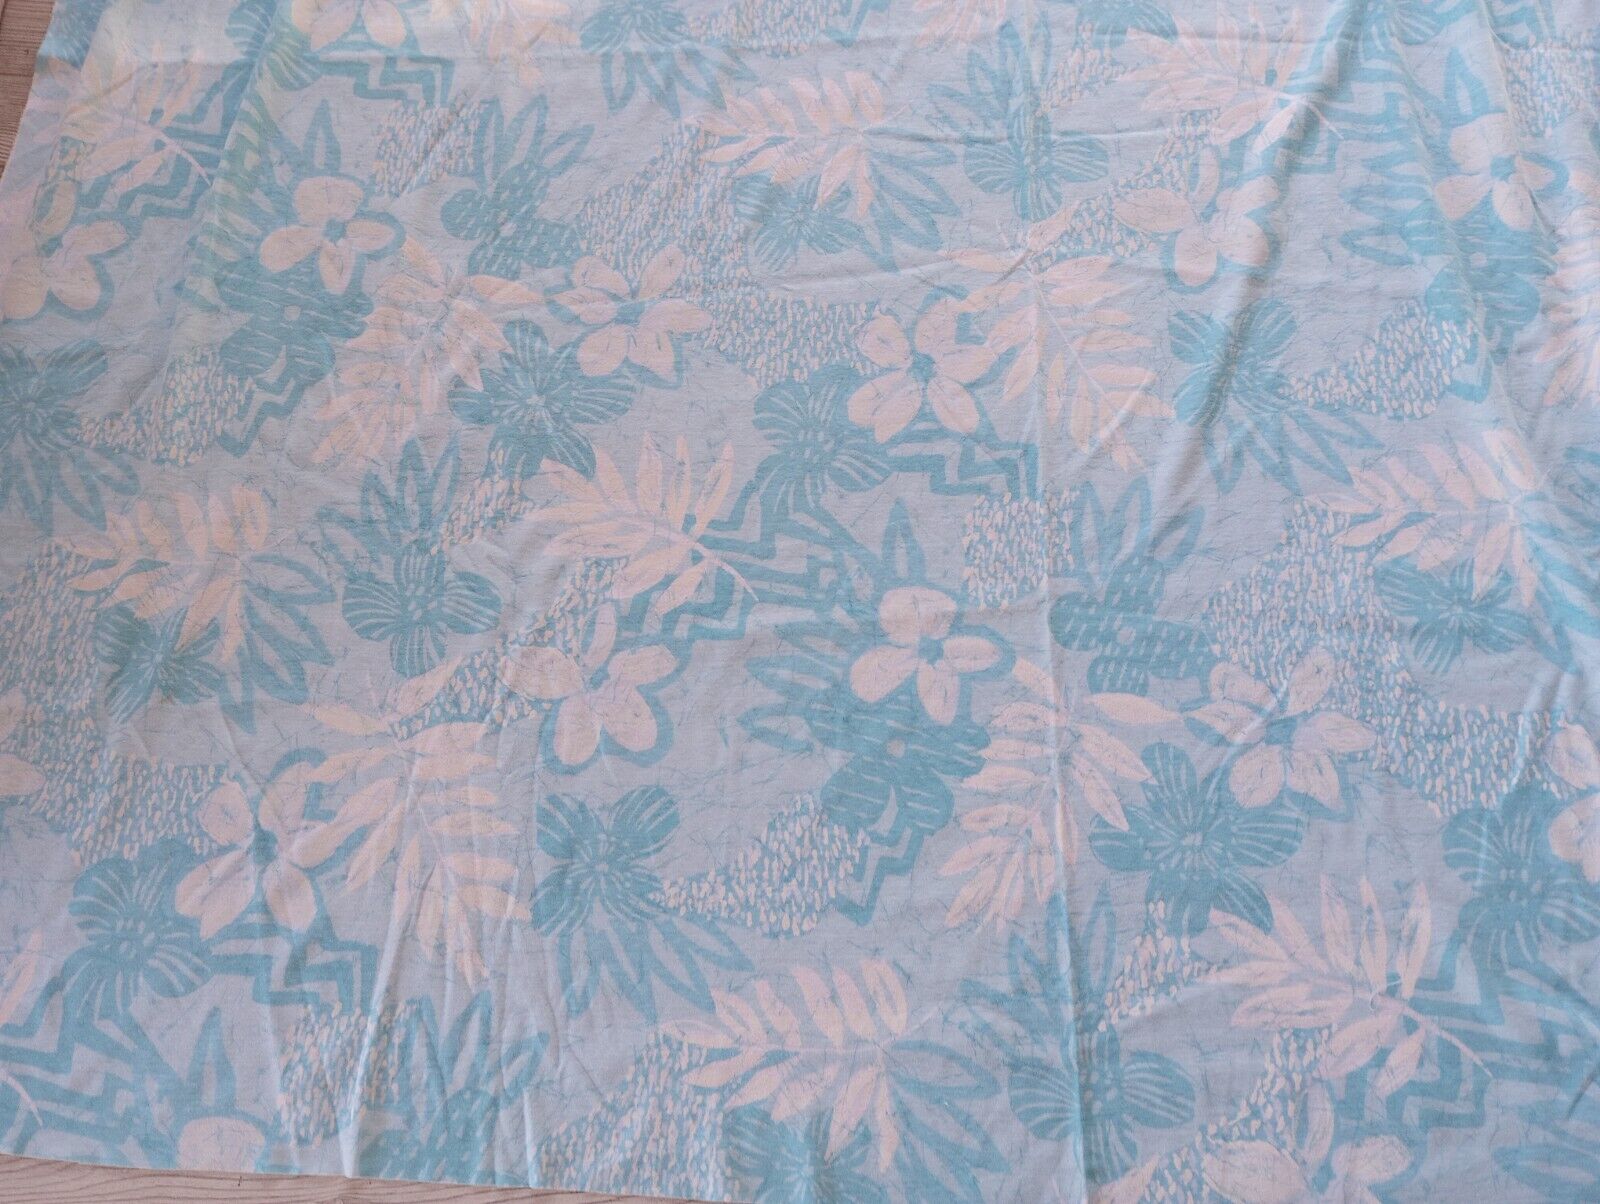 Galey & Lord Vintage Cotton Fabric Teal White Tropical Leaf Design 67x61